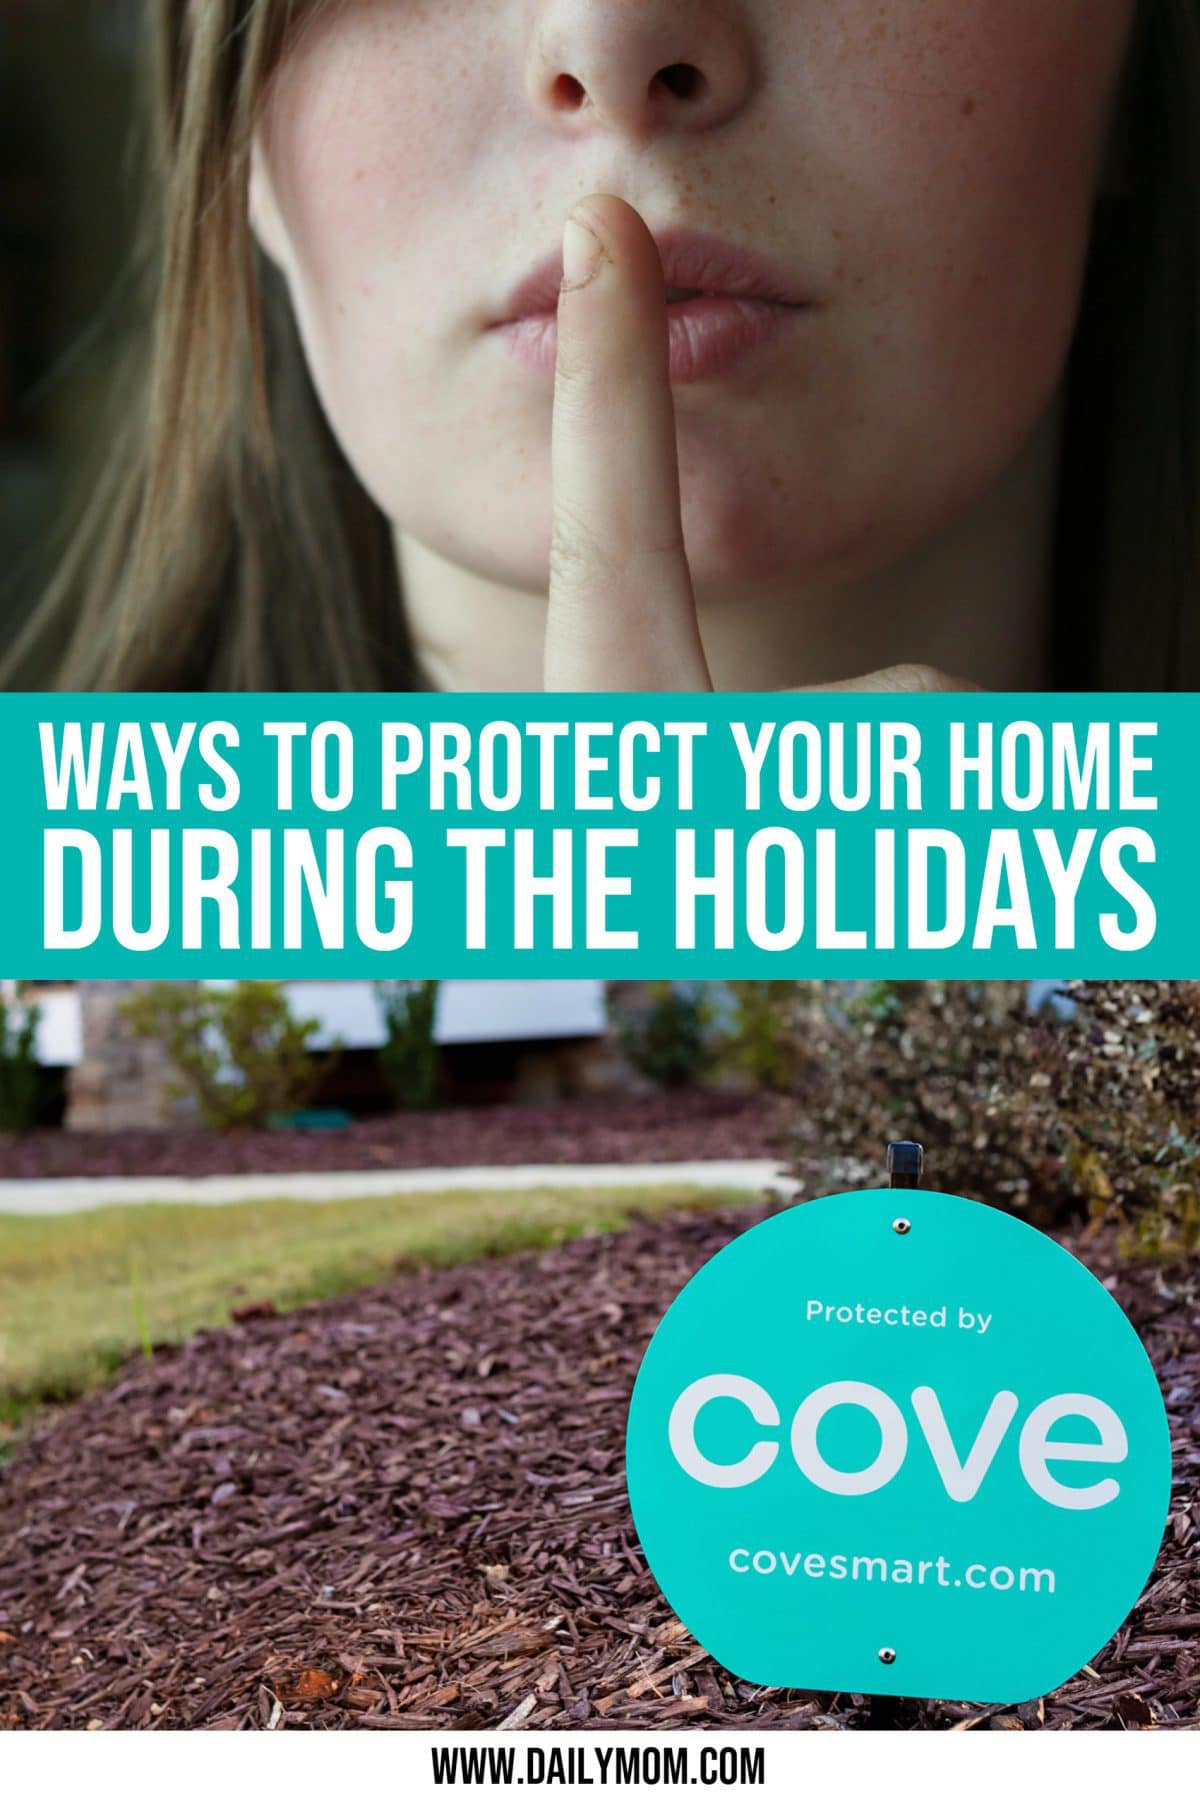 5 Smarter Ways To Protect Your Home During The Holidays